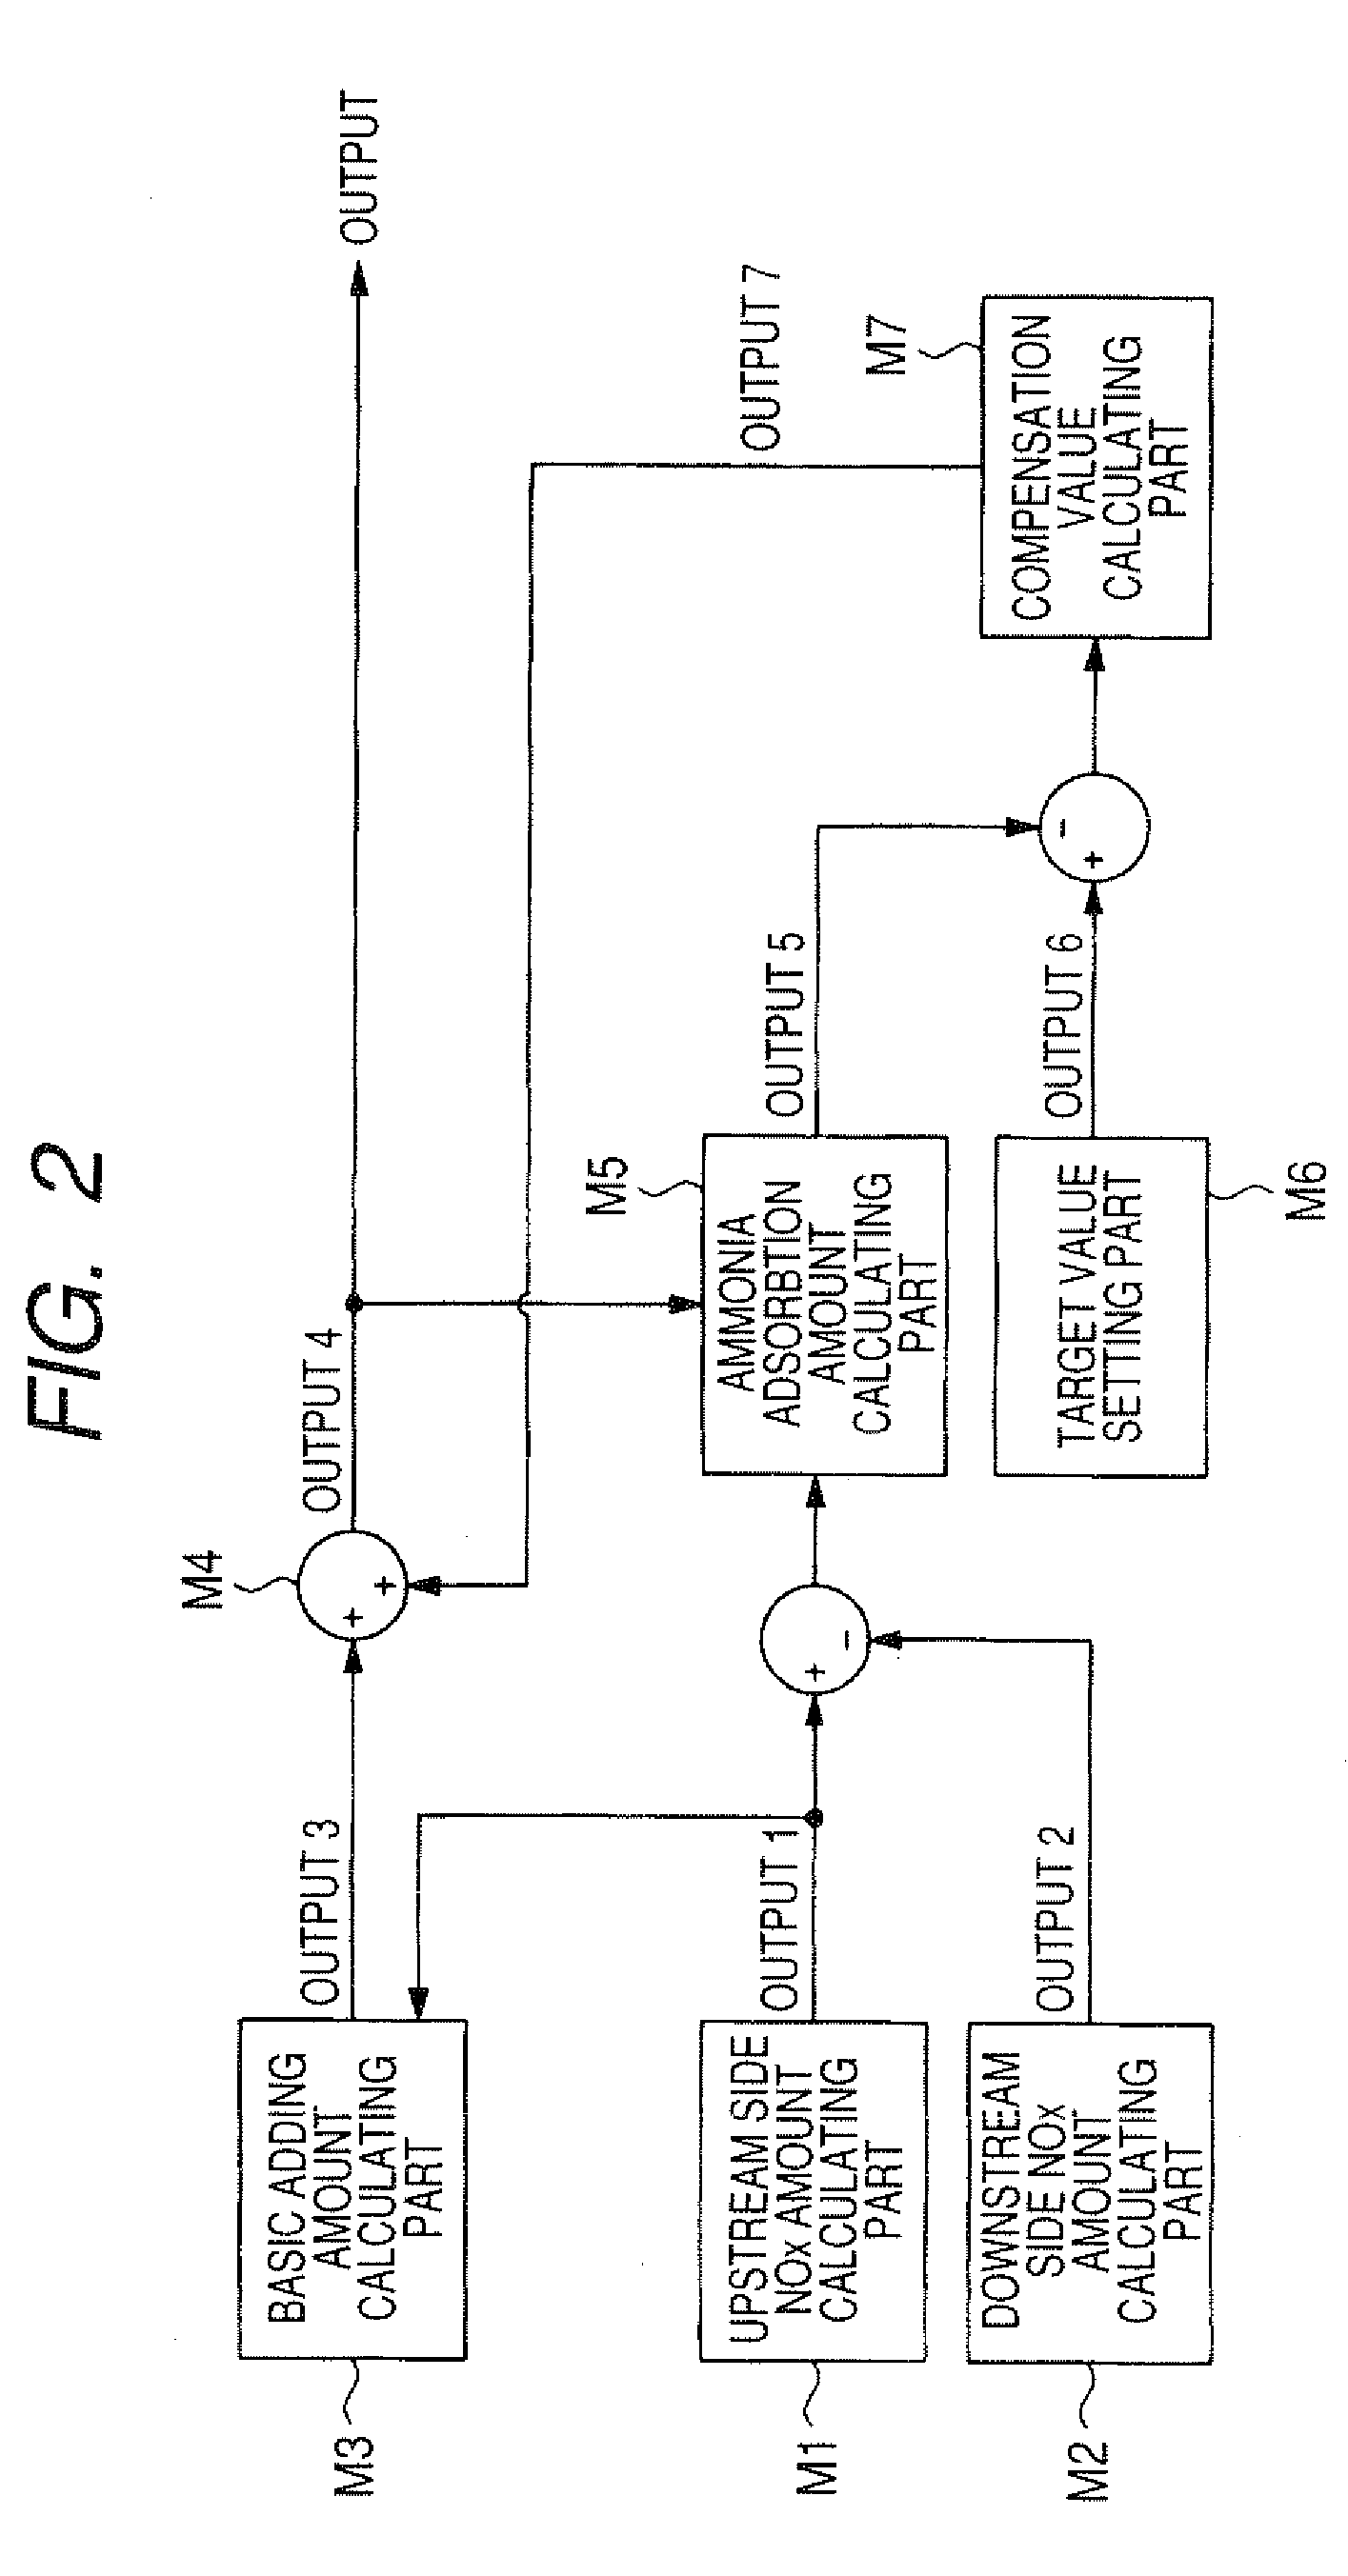 Exhaust gas purifying device for internal combustion engine